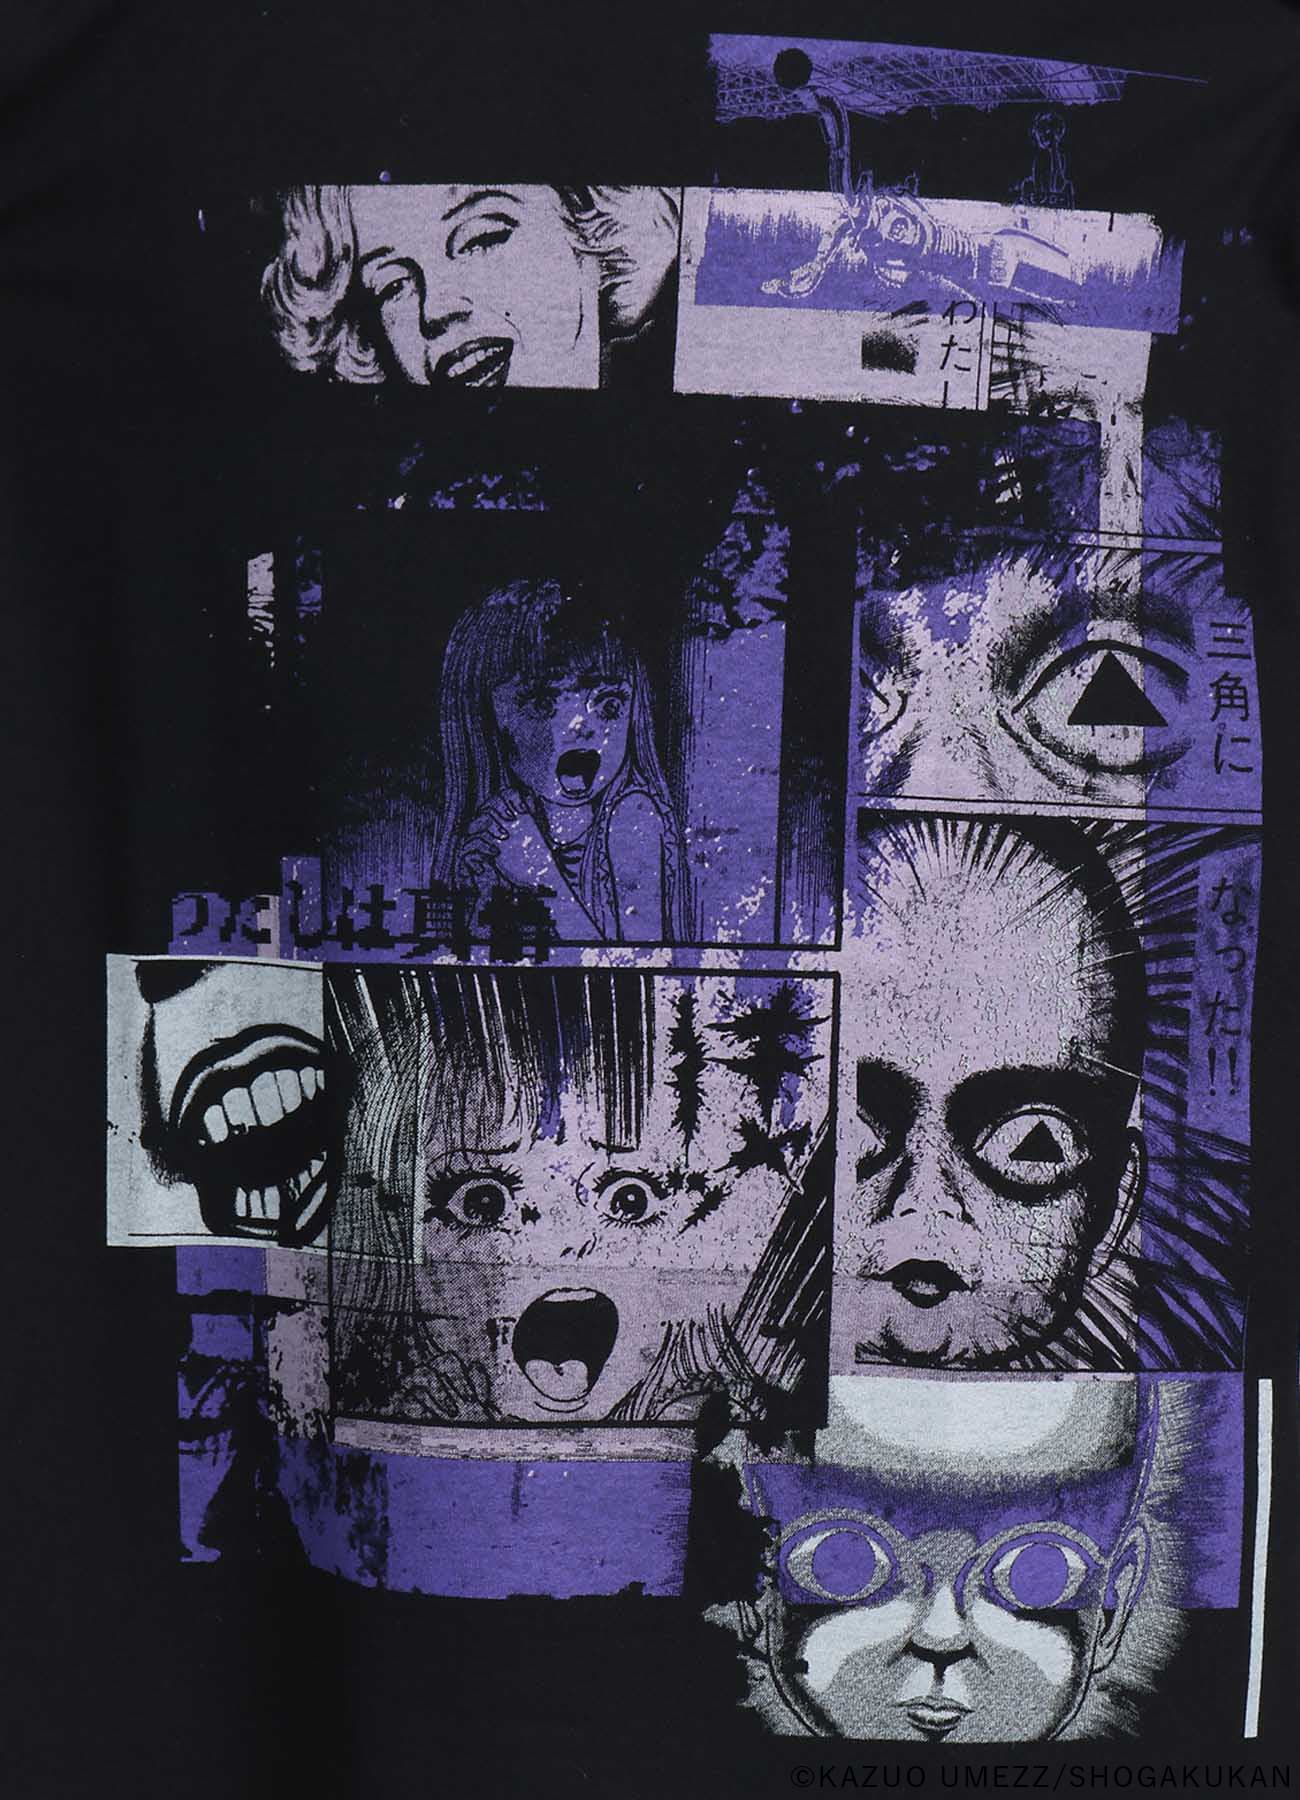 S'YTExKAZUO UMEZZ-MY NAME IS SHINGO- C/JERSEY PRINTED LONG-SLEEVED T-SHIRT WITH COLLAGE OF ILLUSTRATIONS IN COMICS“Monroe&Shingo”